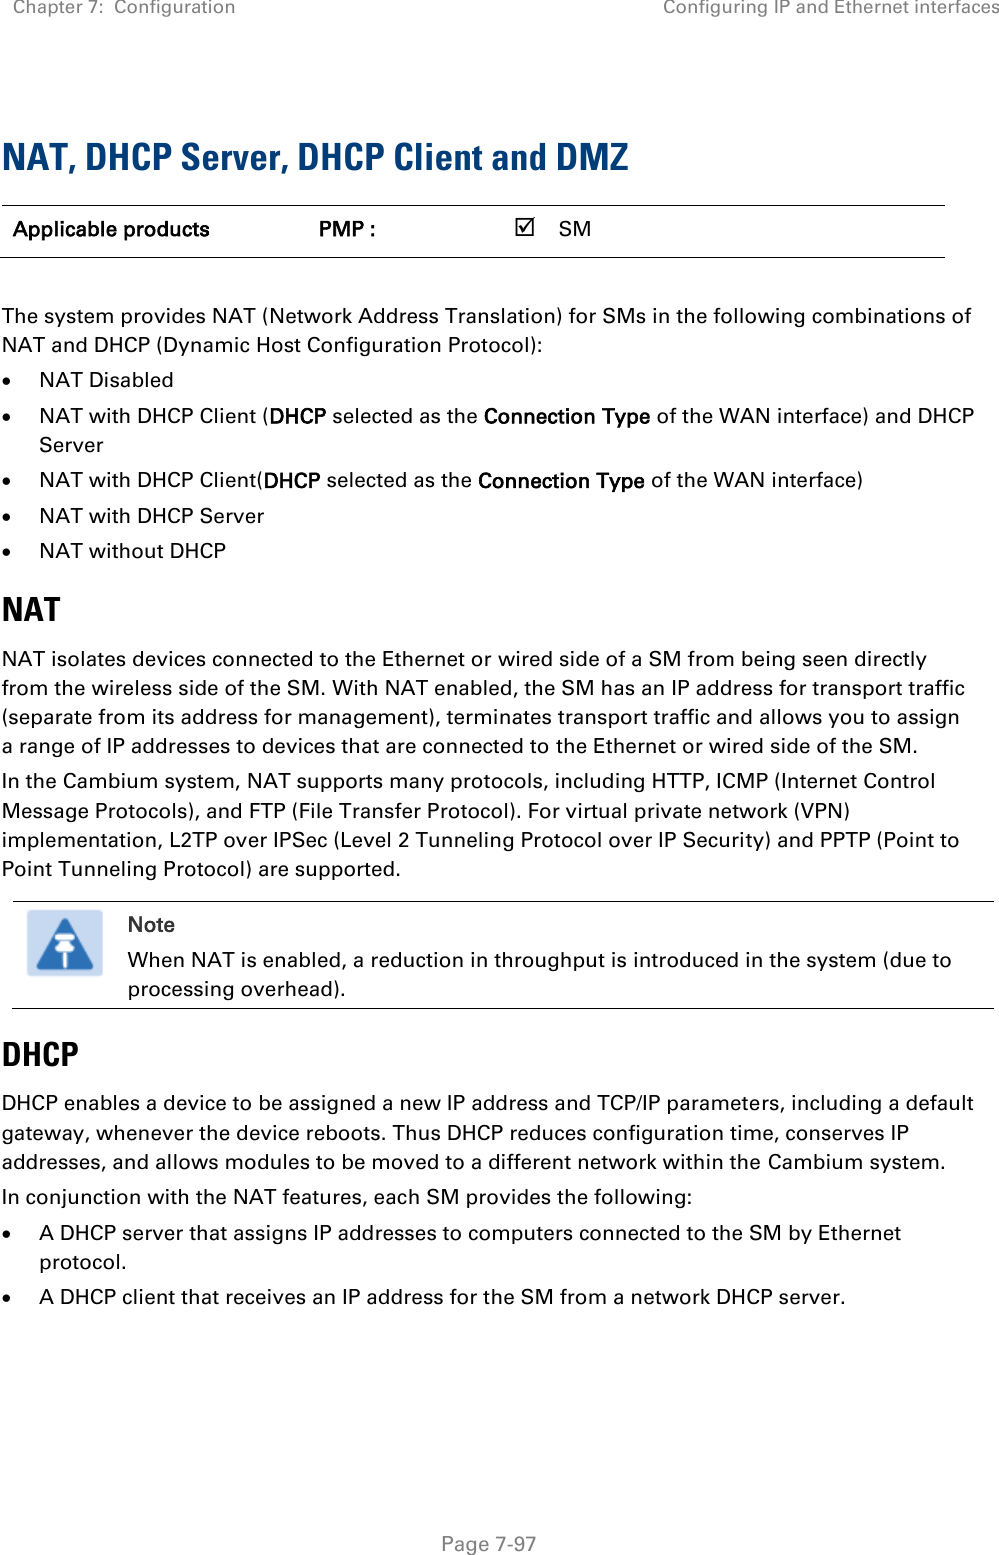 Chapter 7:  Configuration Configuring IP and Ethernet interfaces   Page 7-97  NAT, DHCP Server, DHCP Client and DMZ Applicable products PMP :    SM       The system provides NAT (Network Address Translation) for SMs in the following combinations of NAT and DHCP (Dynamic Host Configuration Protocol):  NAT Disabled  NAT with DHCP Client (DHCP selected as the Connection Type of the WAN interface) and DHCP Server  NAT with DHCP Client(DHCP selected as the Connection Type of the WAN interface)  NAT with DHCP Server  NAT without DHCP NAT NAT isolates devices connected to the Ethernet or wired side of a SM from being seen directly from the wireless side of the SM. With NAT enabled, the SM has an IP address for transport traffic (separate from its address for management), terminates transport traffic and allows you to assign a range of IP addresses to devices that are connected to the Ethernet or wired side of the SM.  In the Cambium system, NAT supports many protocols, including HTTP, ICMP (Internet Control Message Protocols), and FTP (File Transfer Protocol). For virtual private network (VPN) implementation, L2TP over IPSec (Level 2 Tunneling Protocol over IP Security) and PPTP (Point to Point Tunneling Protocol) are supported.   Note When NAT is enabled, a reduction in throughput is introduced in the system (due to processing overhead). DHCP DHCP enables a device to be assigned a new IP address and TCP/IP parameters, including a default gateway, whenever the device reboots. Thus DHCP reduces configuration time, conserves IP addresses, and allows modules to be moved to a different network within the Cambium system. In conjunction with the NAT features, each SM provides the following:  A DHCP server that assigns IP addresses to computers connected to the SM by Ethernet protocol.  A DHCP client that receives an IP address for the SM from a network DHCP server.  